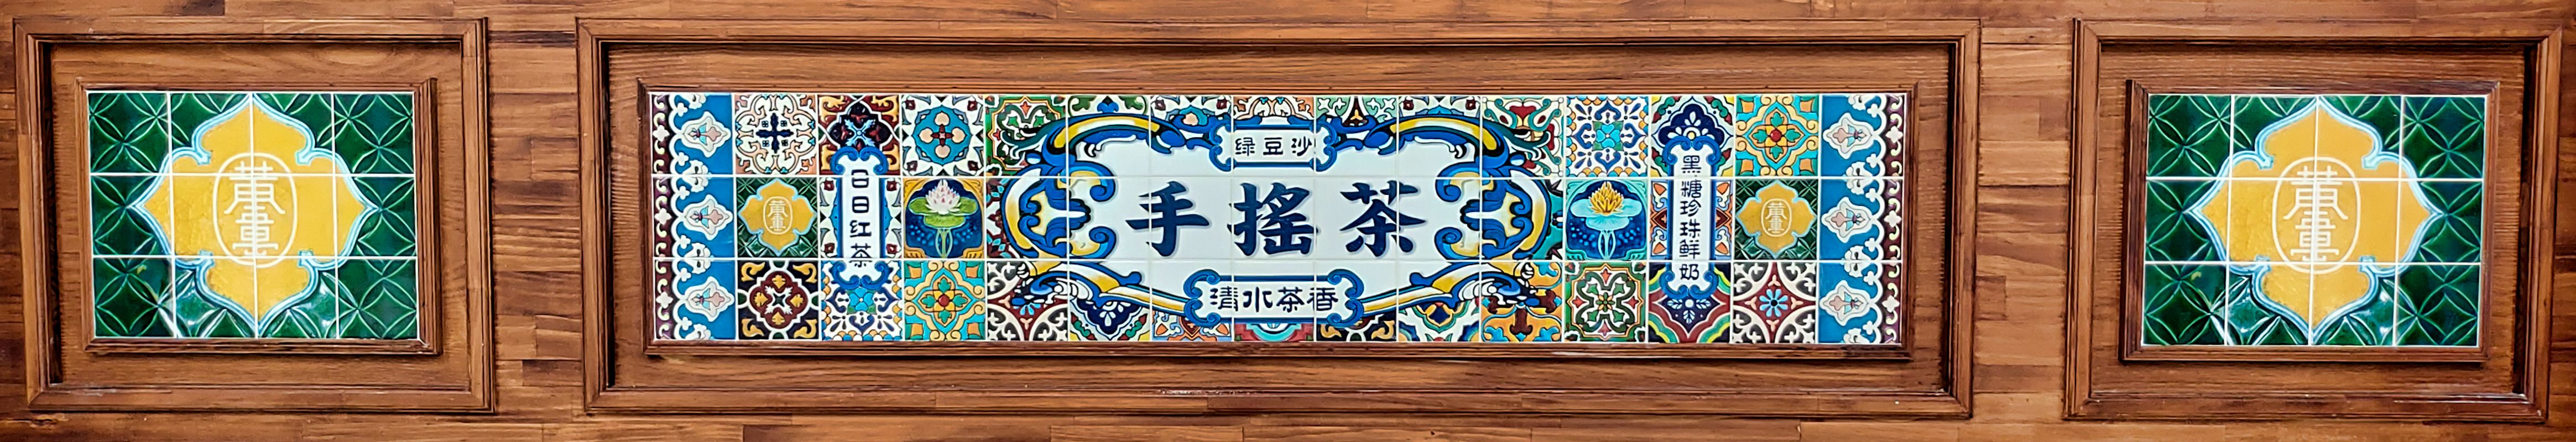 Traditional Taiwanese styles painted tiles on the wall of ...